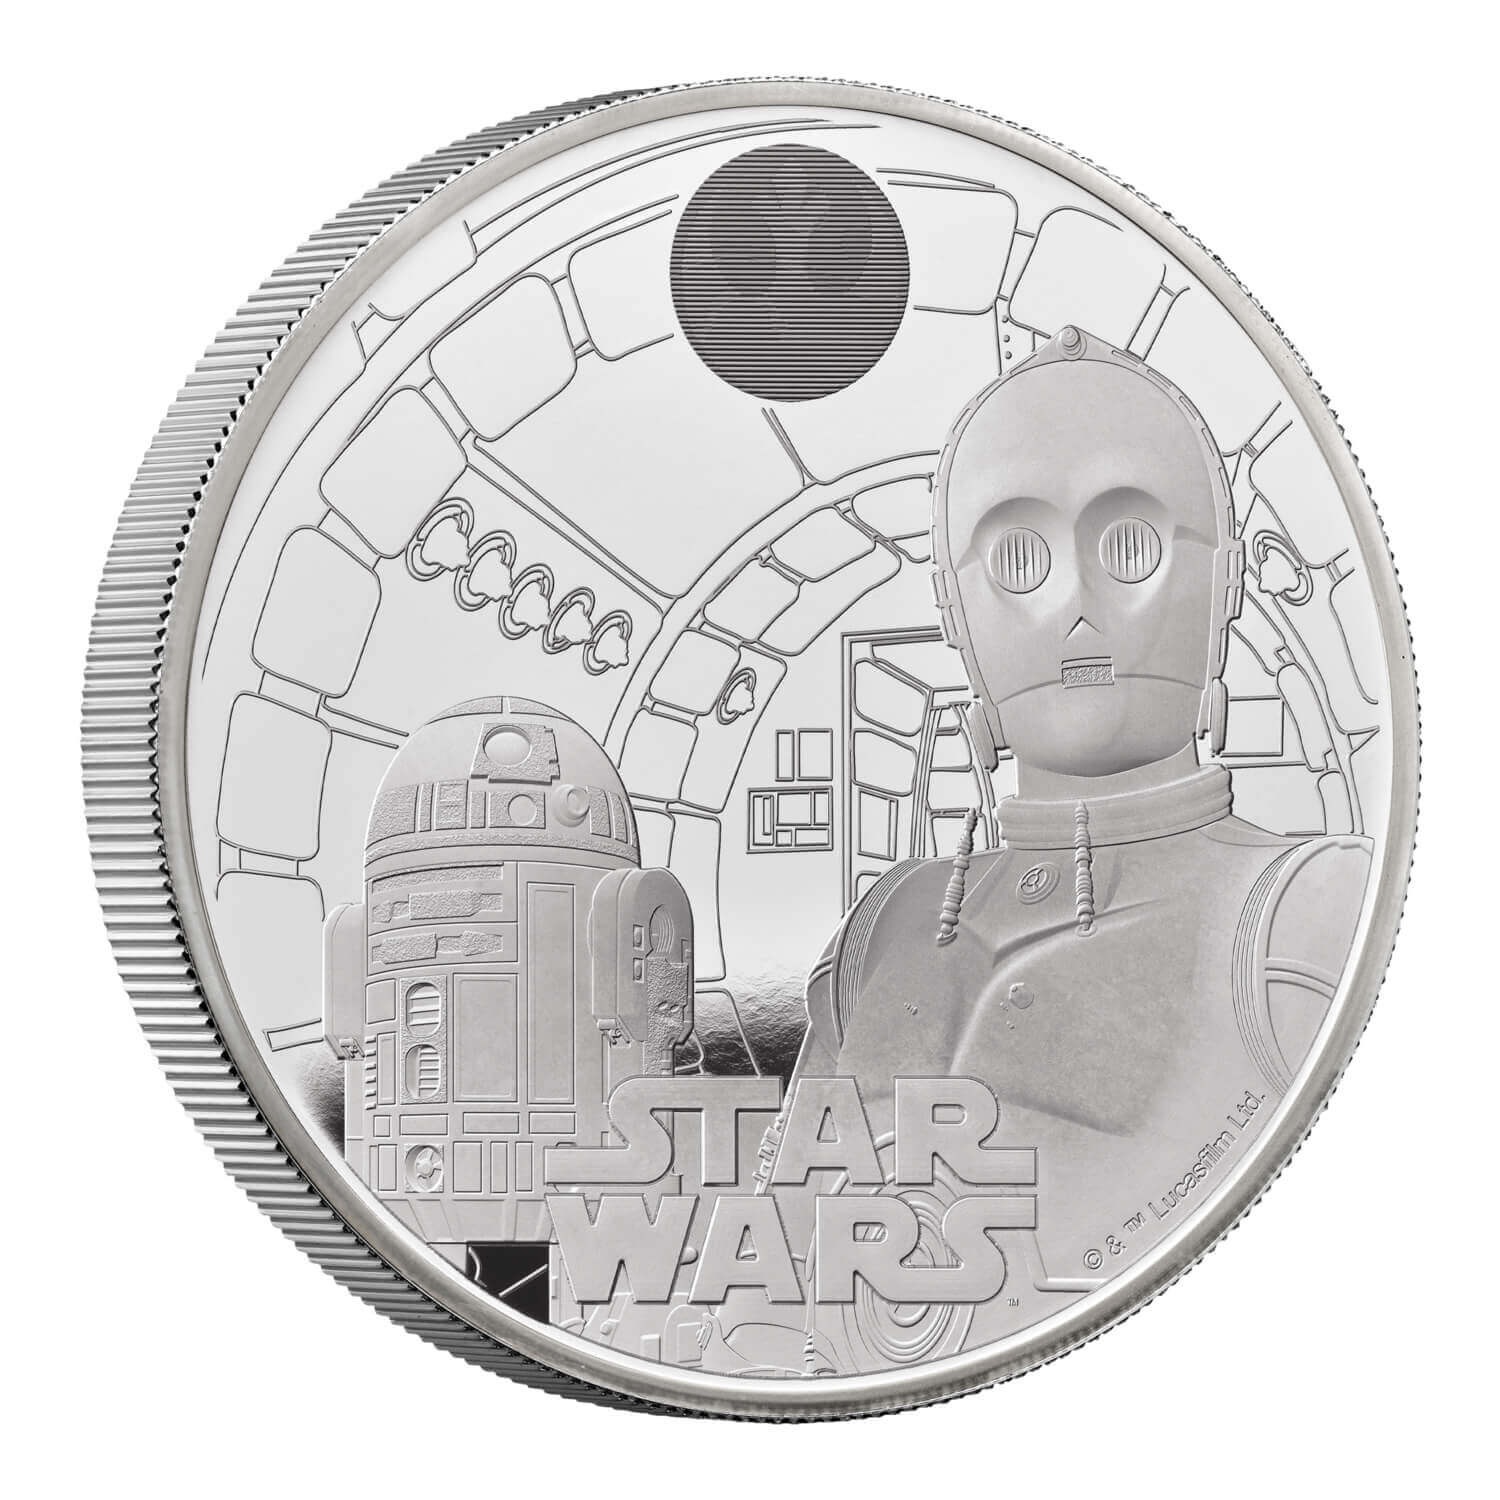 (W185.10.P.2023.UK23R2S5) 10 Pounds United Kingdom 2023 5 oz Proof silver - Star Wars (R2-D2 and C3PO) Reverse (zoom)